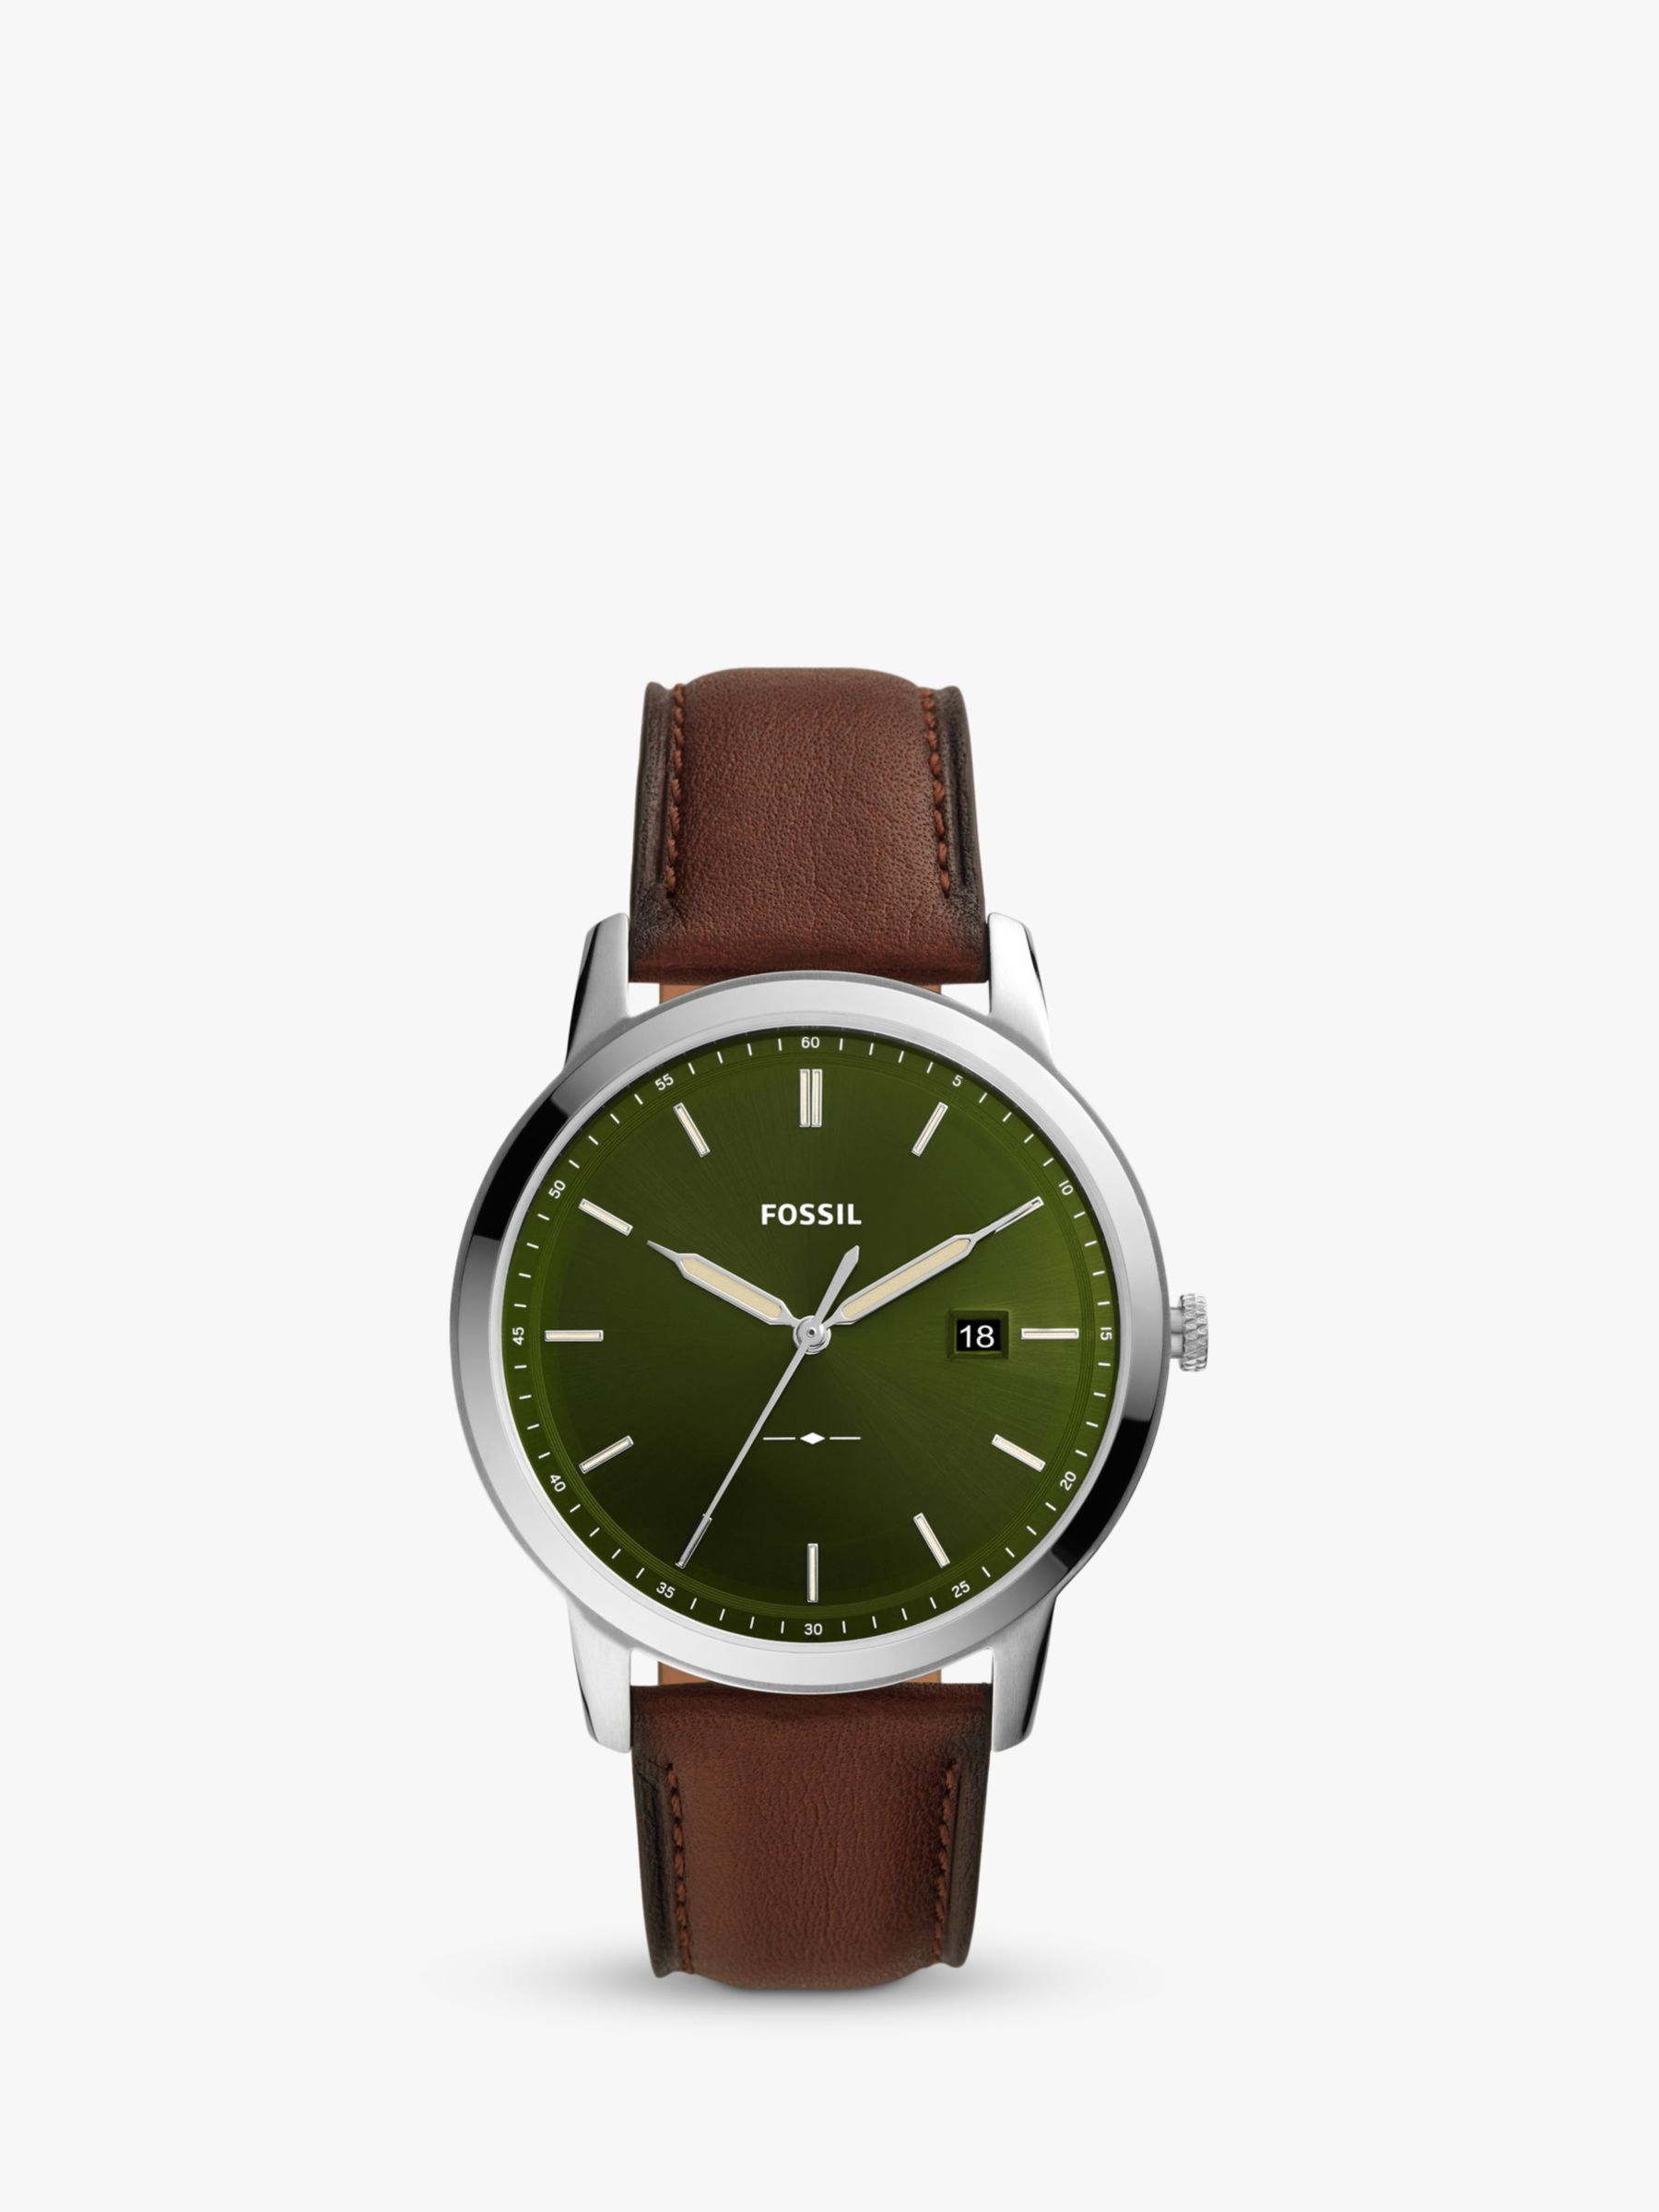 Fossil FS5838 Men's Minimalist Date Leather Strap Watch, Brown/Green at ...